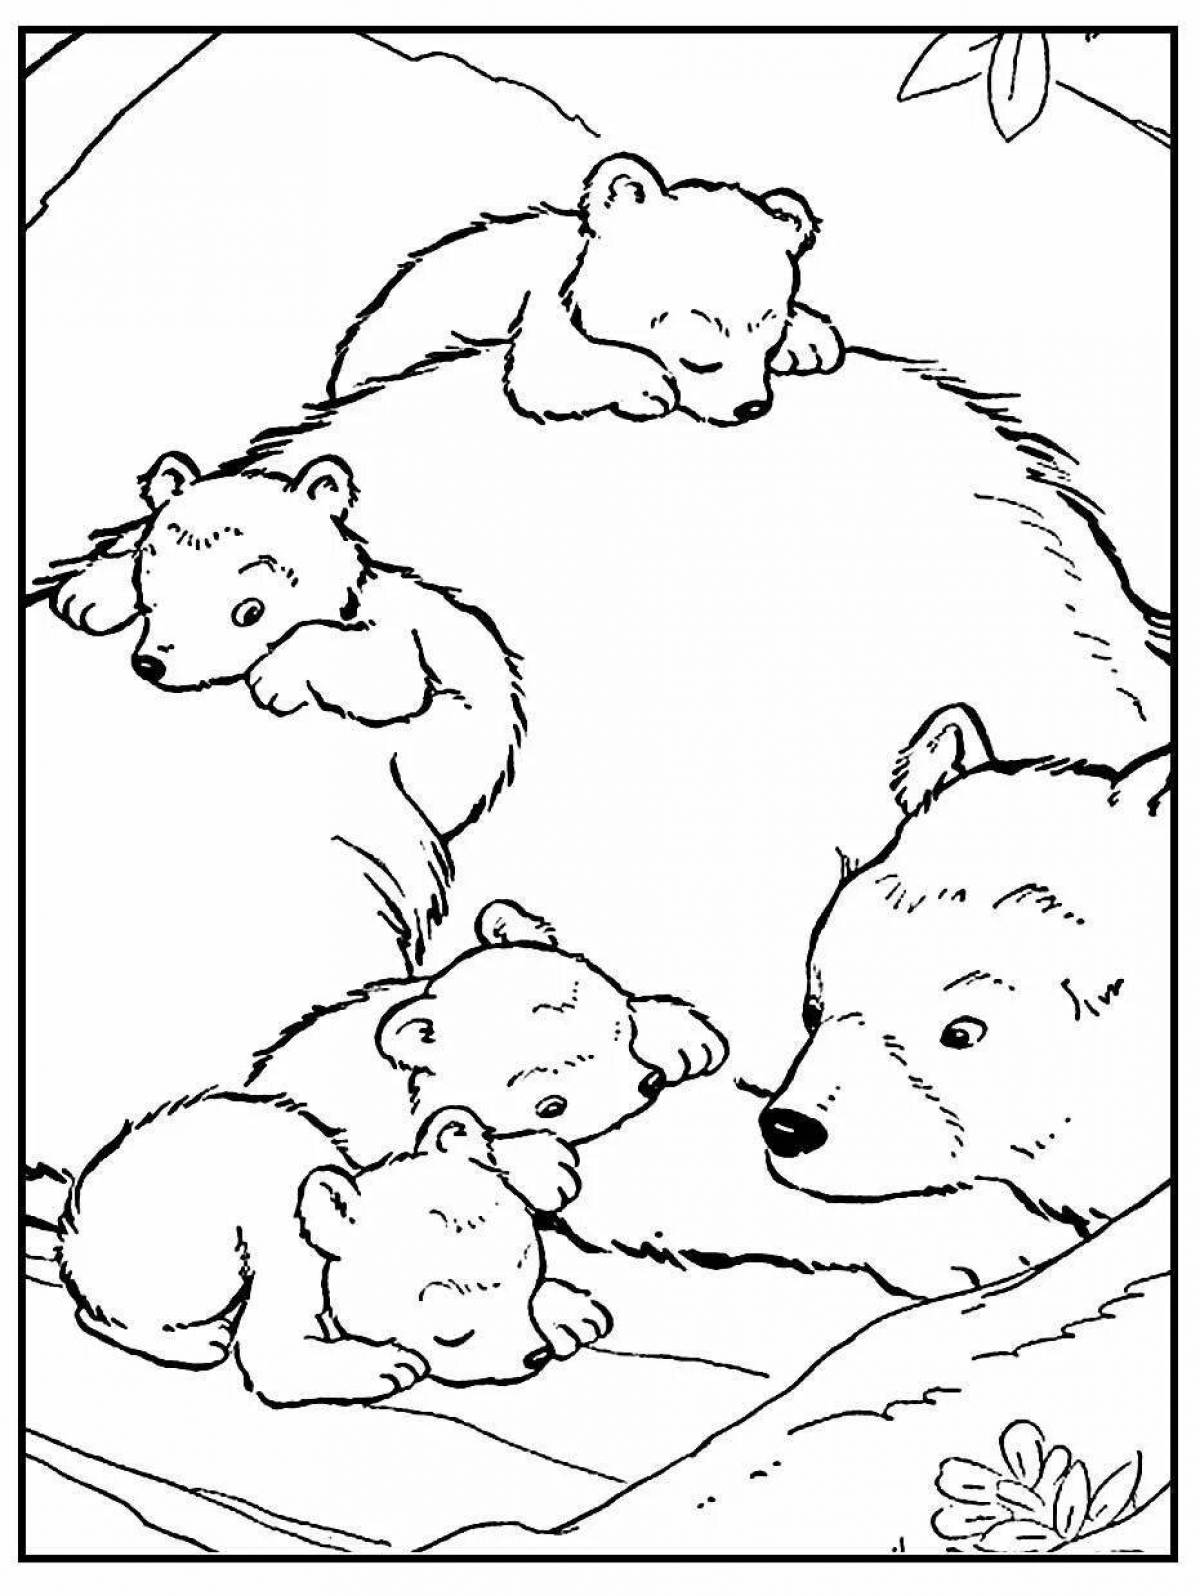 Coloring page nice bear with cubs